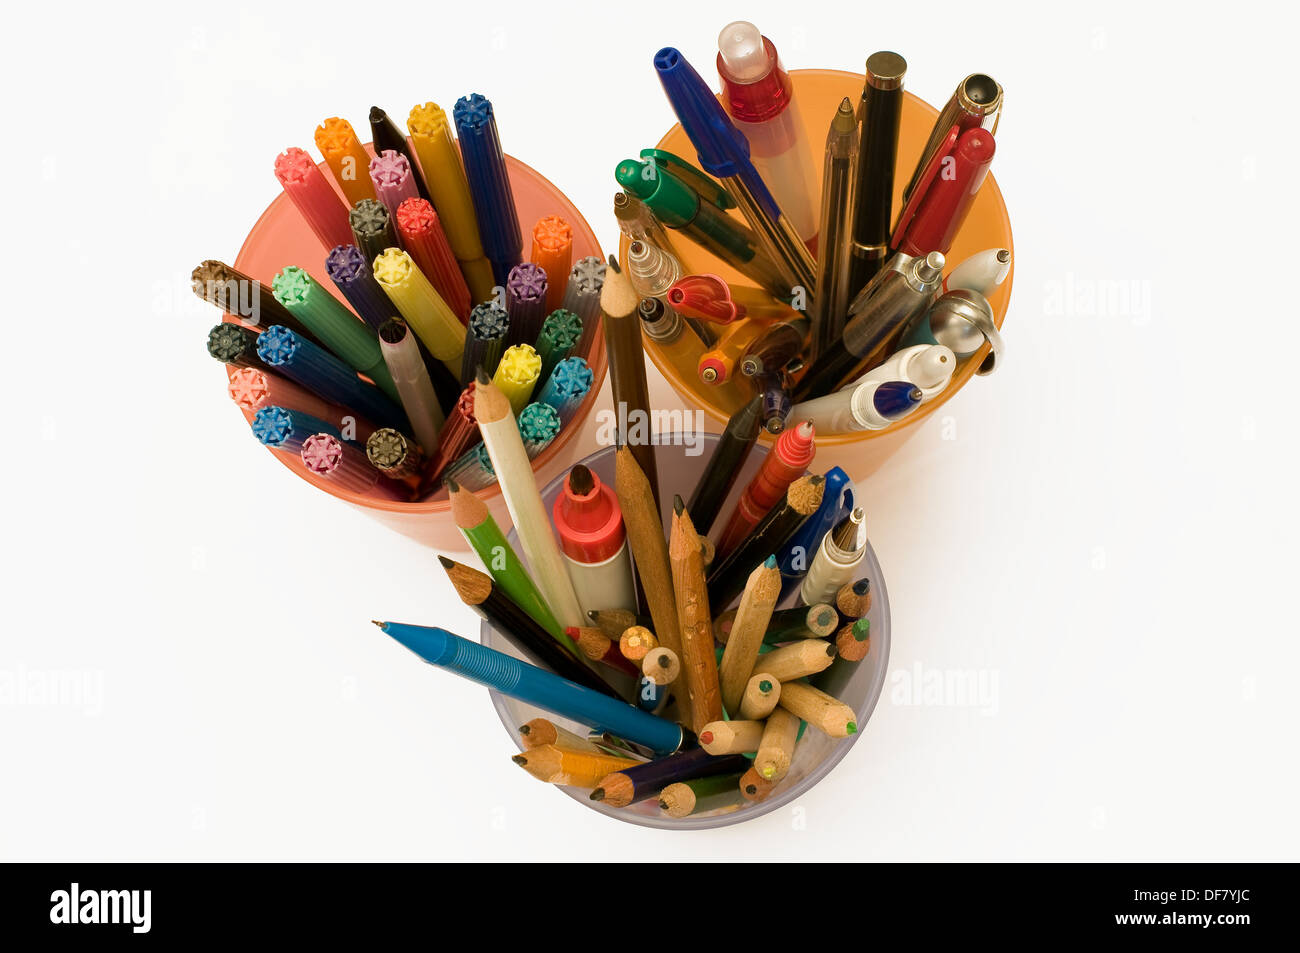 Colorful pens, felt-tips, markers and pencils in a box container on a white background Stock Photo